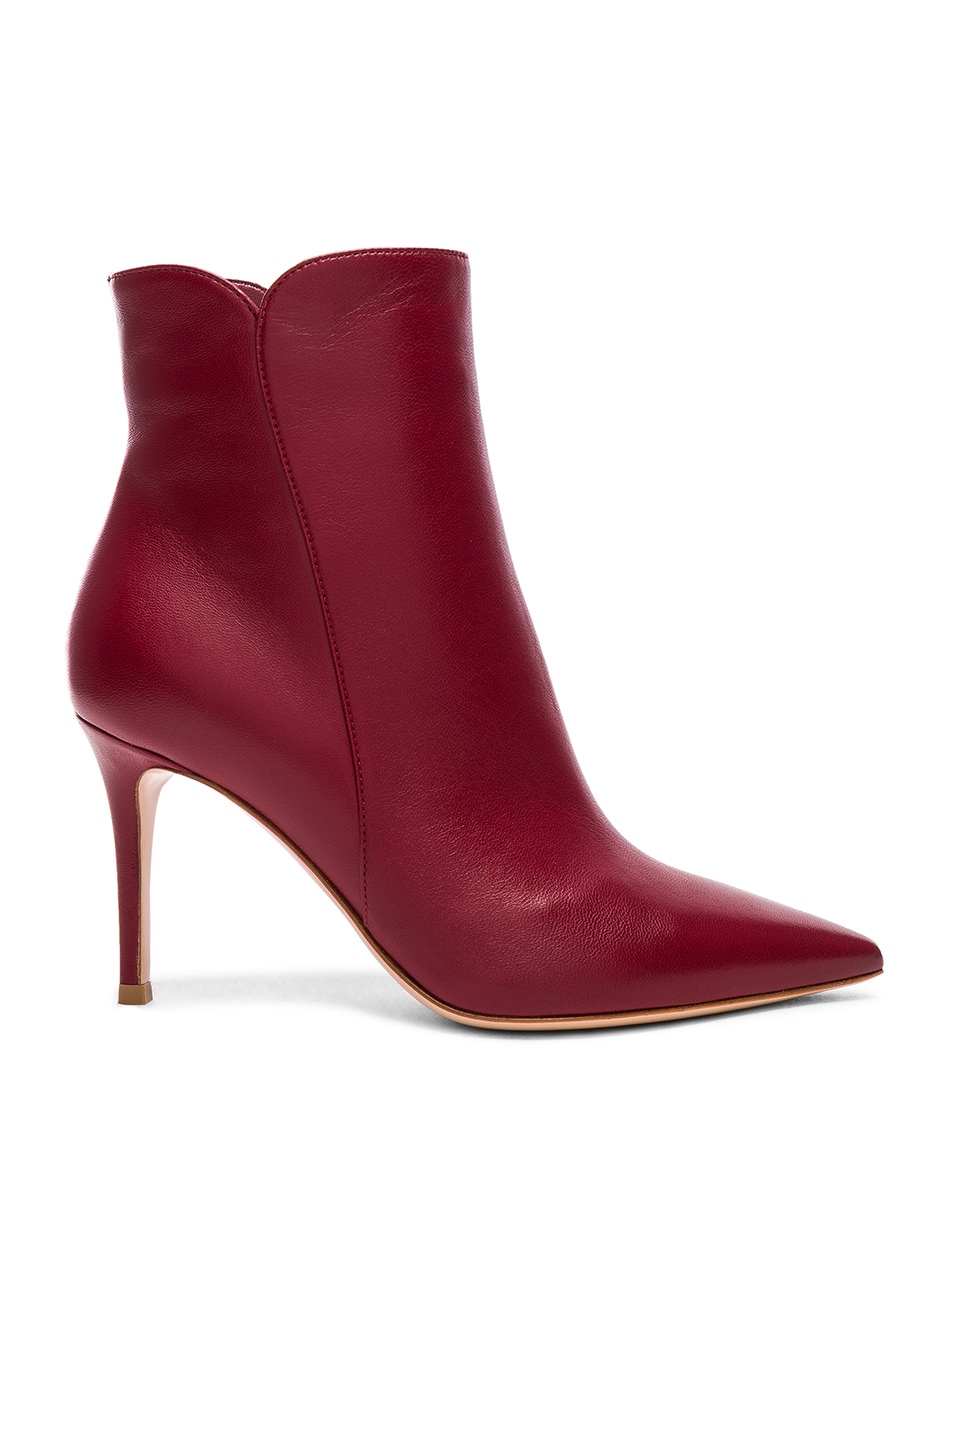 Image 1 of Gianvito Rossi Leather Levy Ankle Boots in Syrah